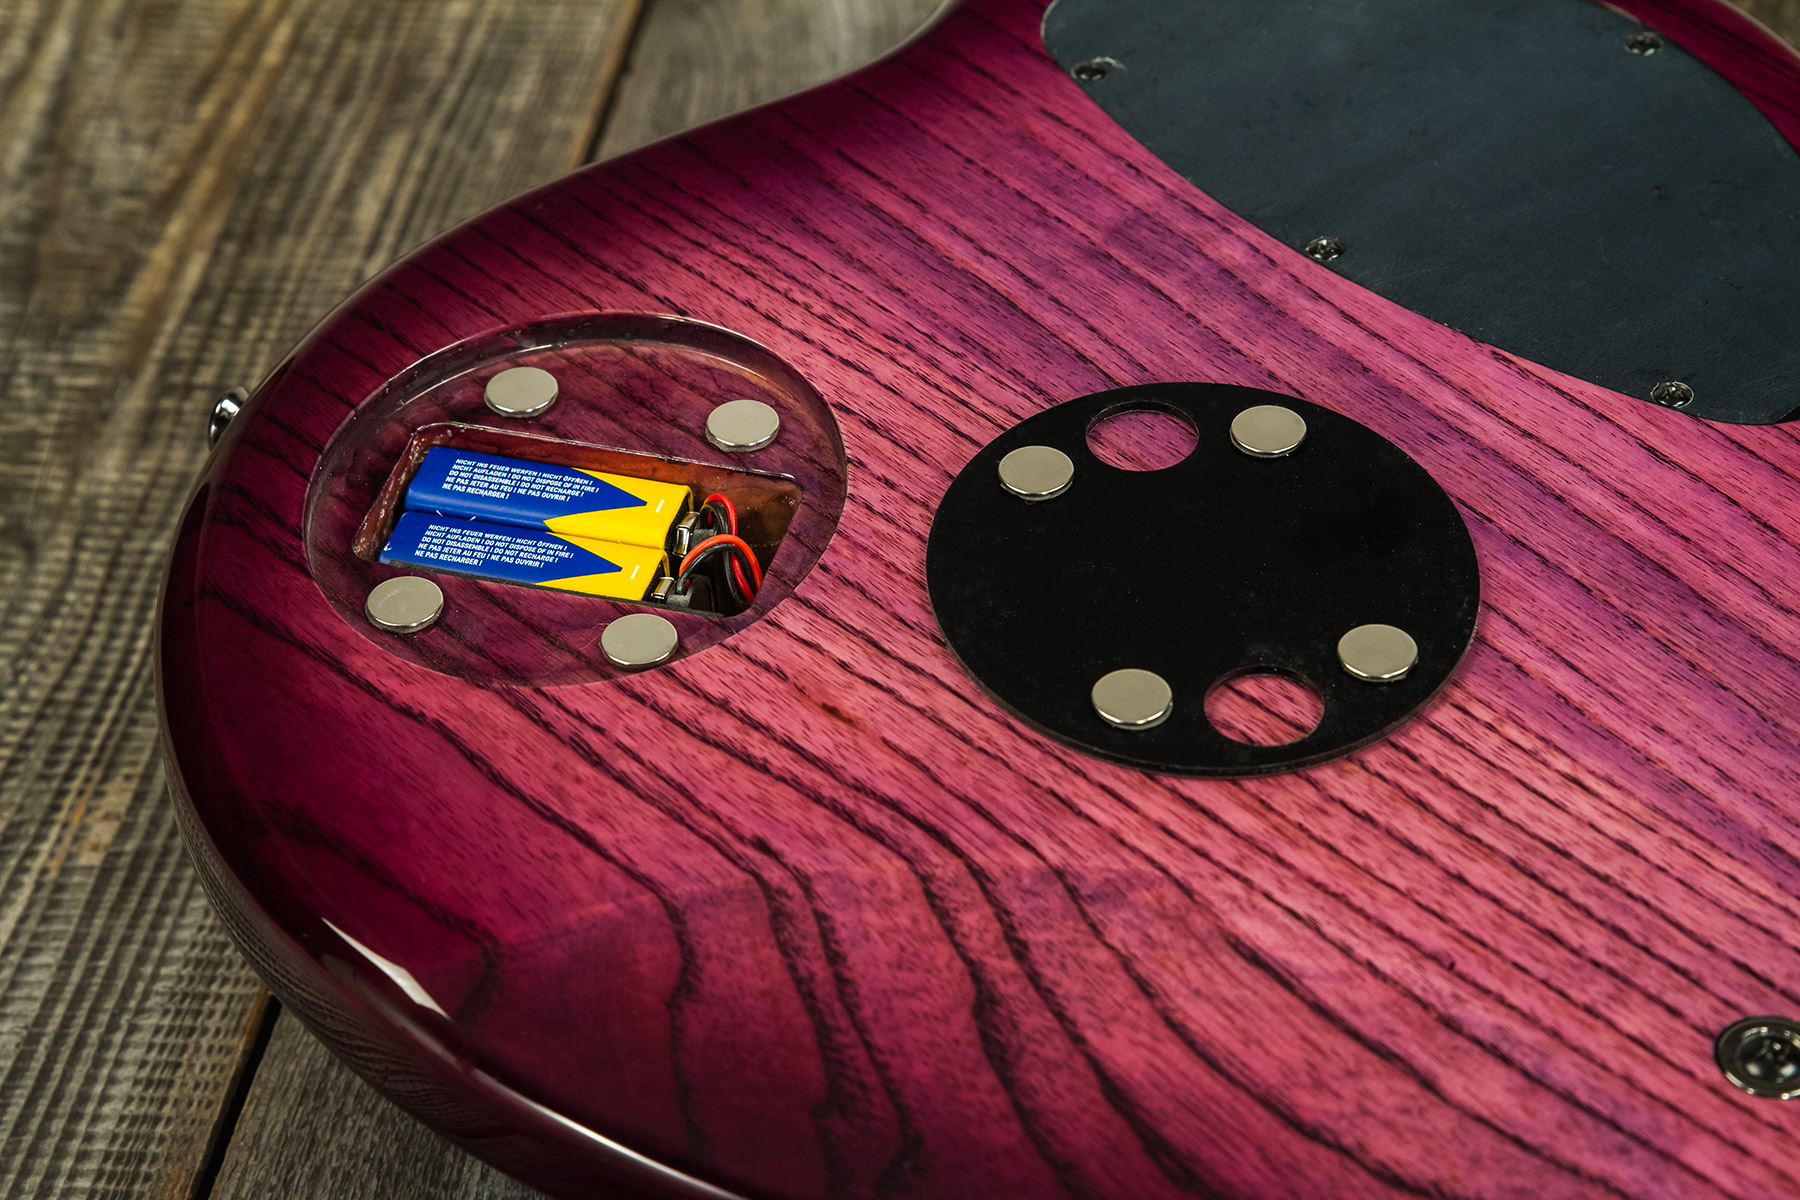 Dingwall Combustion Cb3 6c 3pu Active Mn - Ultraviolet - Solid body electric bass - Variation 5